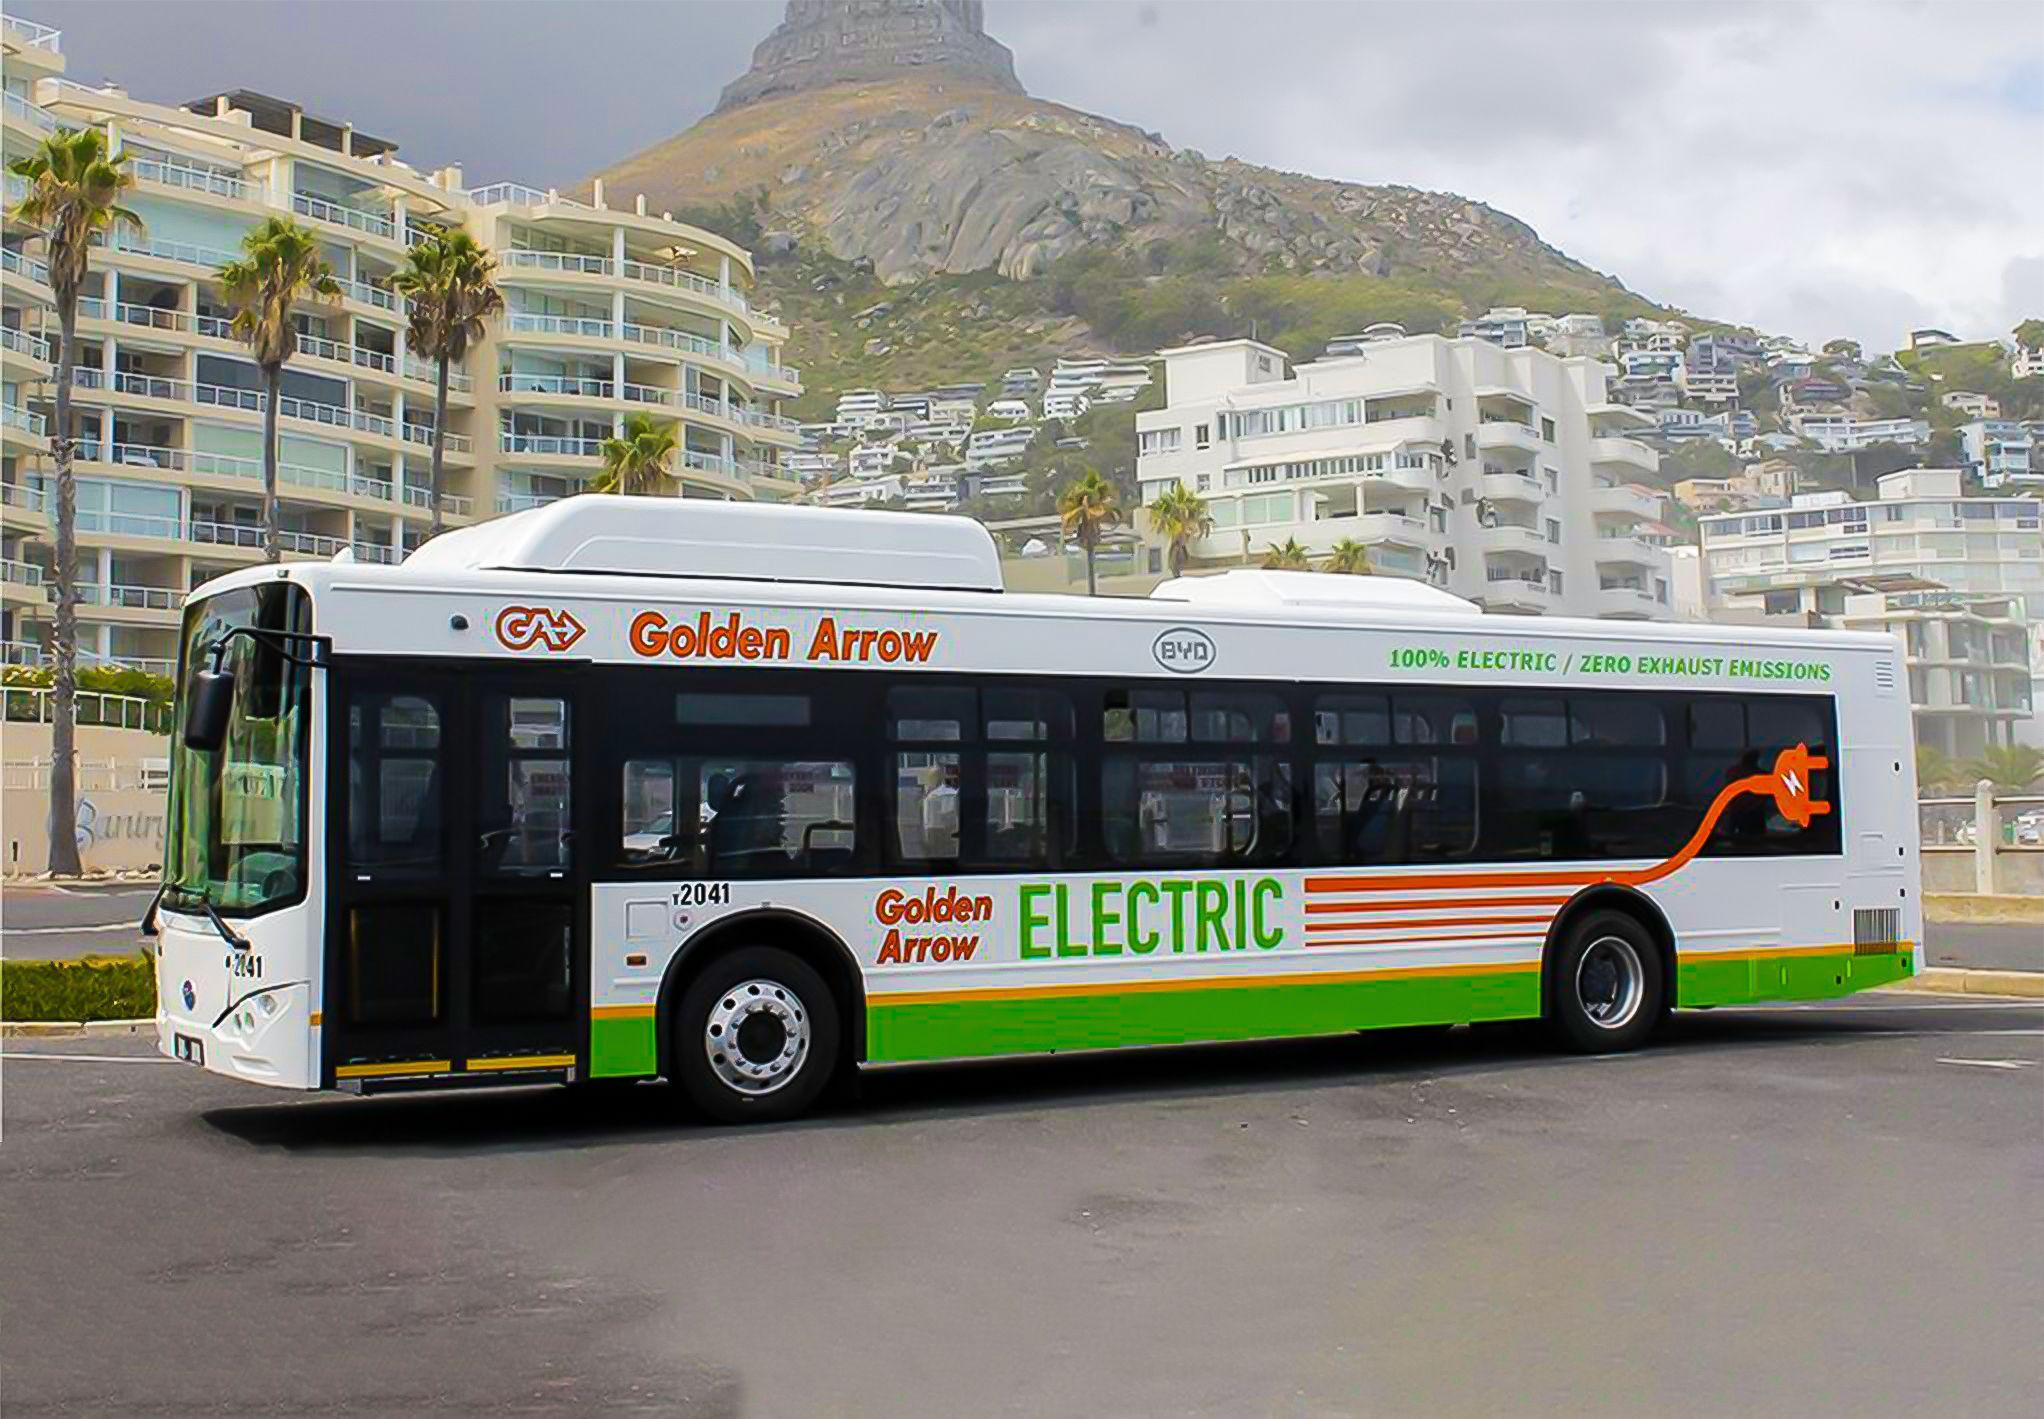 Urban transport across Africa turns to electrification 🚌⚡